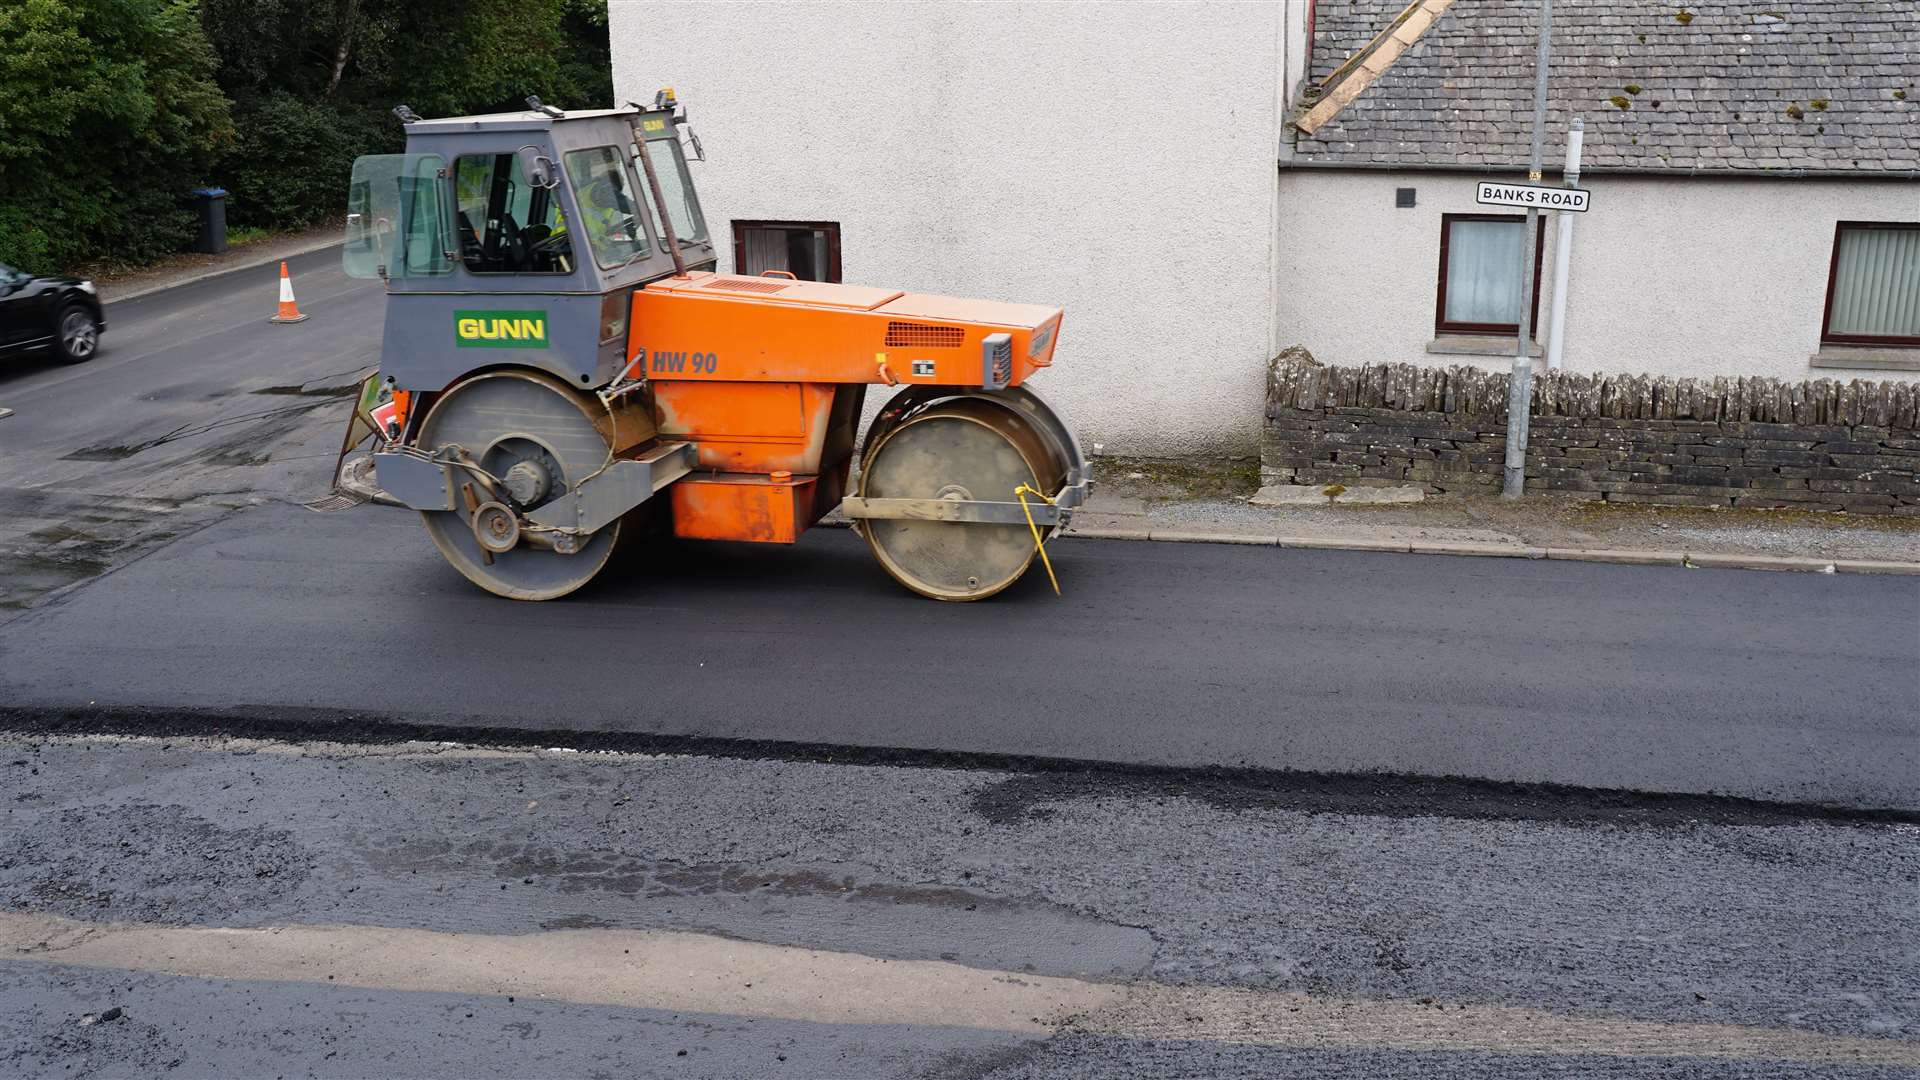 Road repairs will continue in Caithness, but some low volume and rural routes will be disadvantaged, according to the report. Picture: DGS